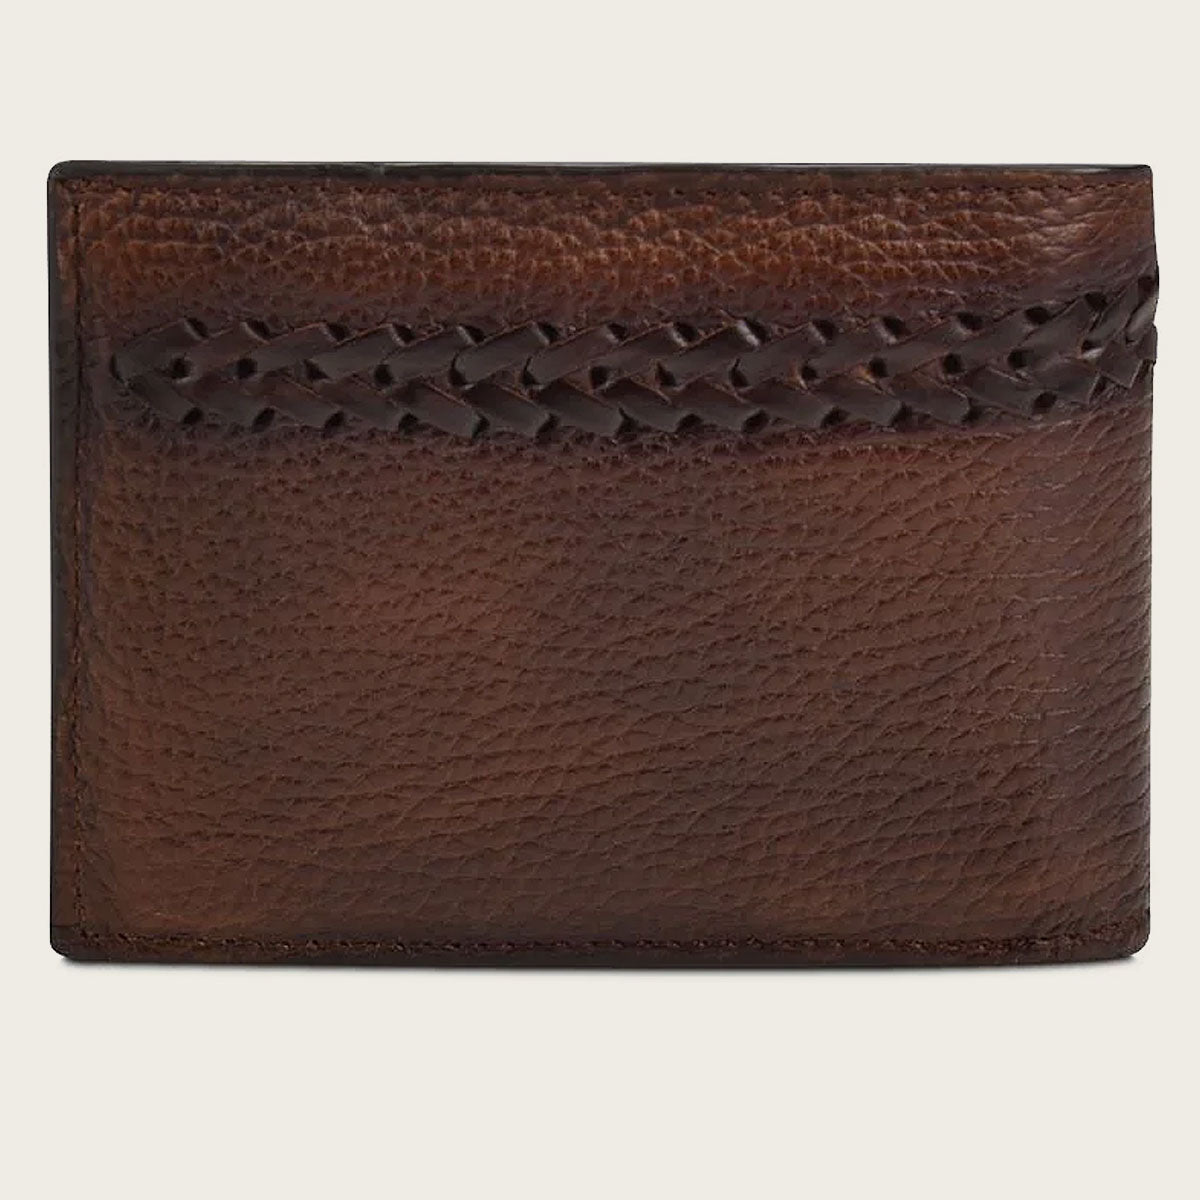 Men's wallet in genuine deer leather. Which contrasts with the fineness and softness of this leather.